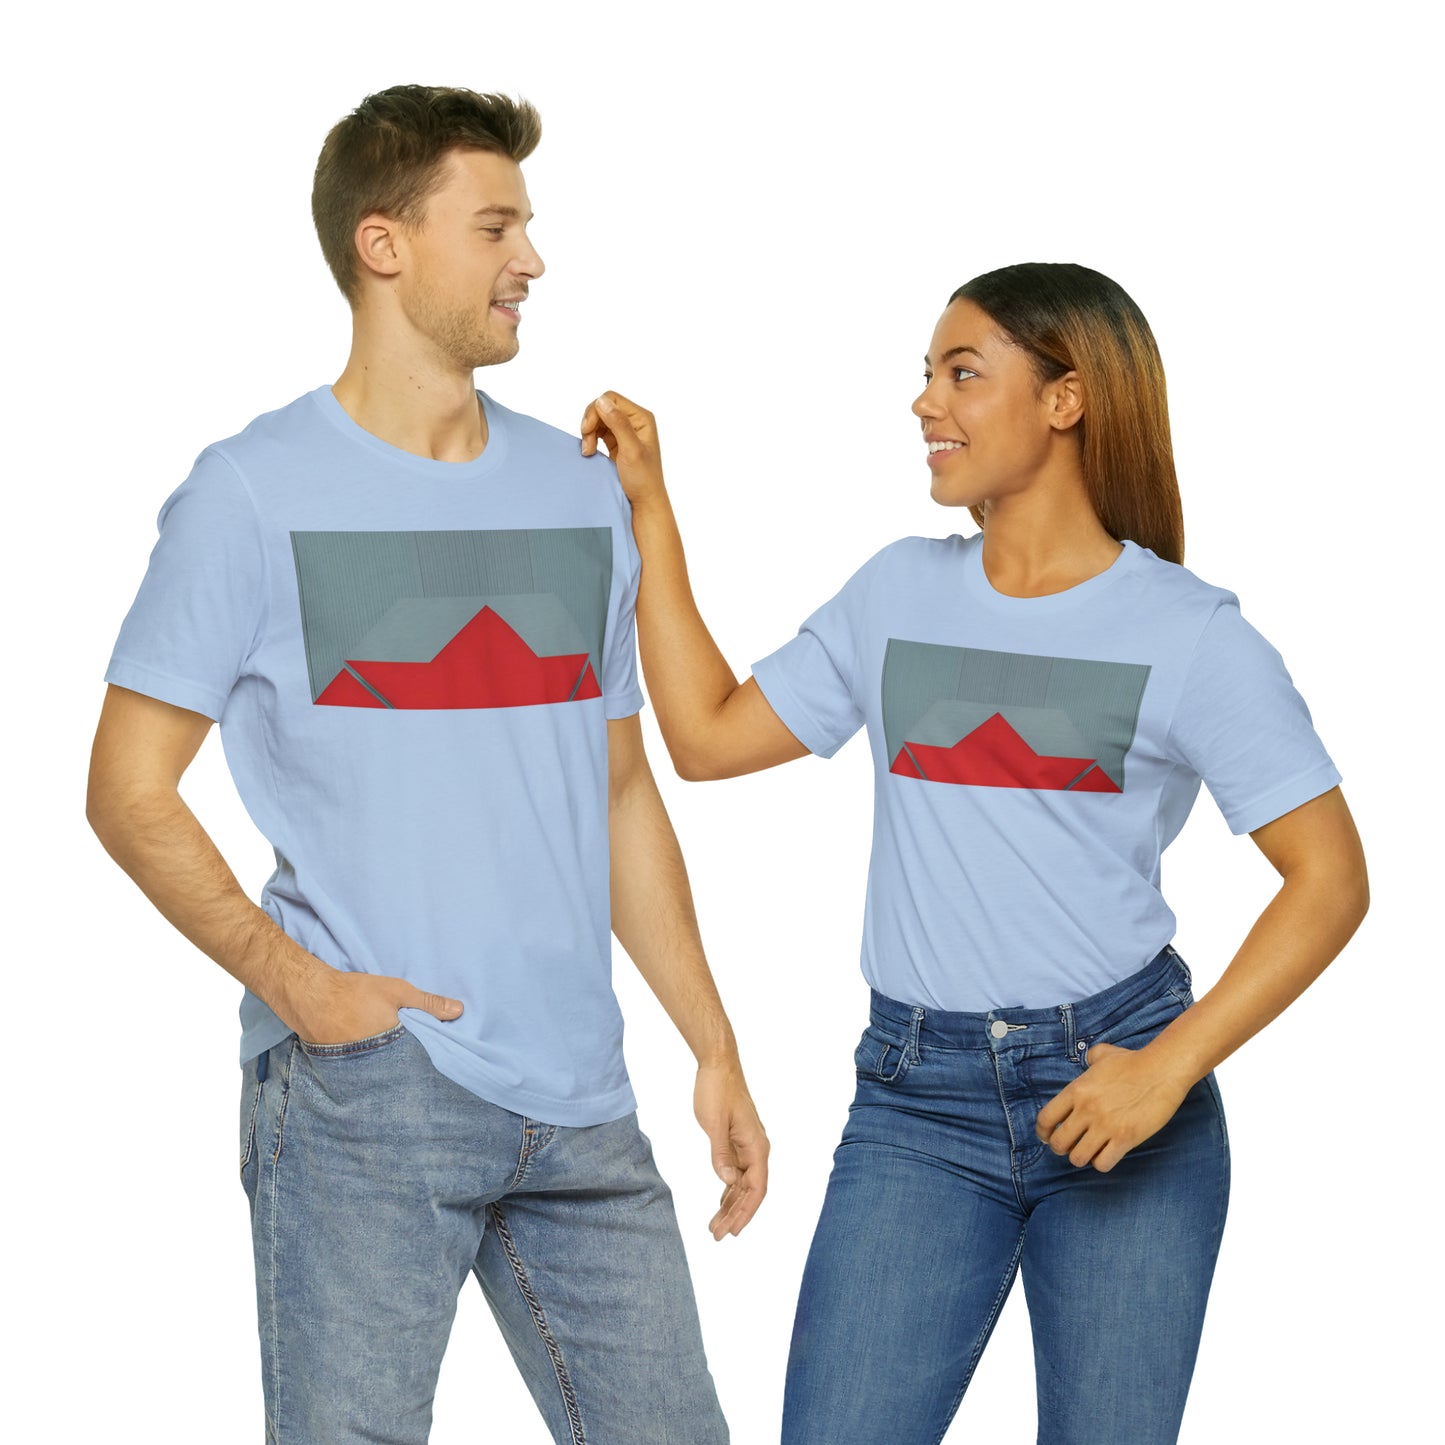 ABSTRACT SHAPES 101 MIRROR - Unisex Jersey Short Sleeve Tee